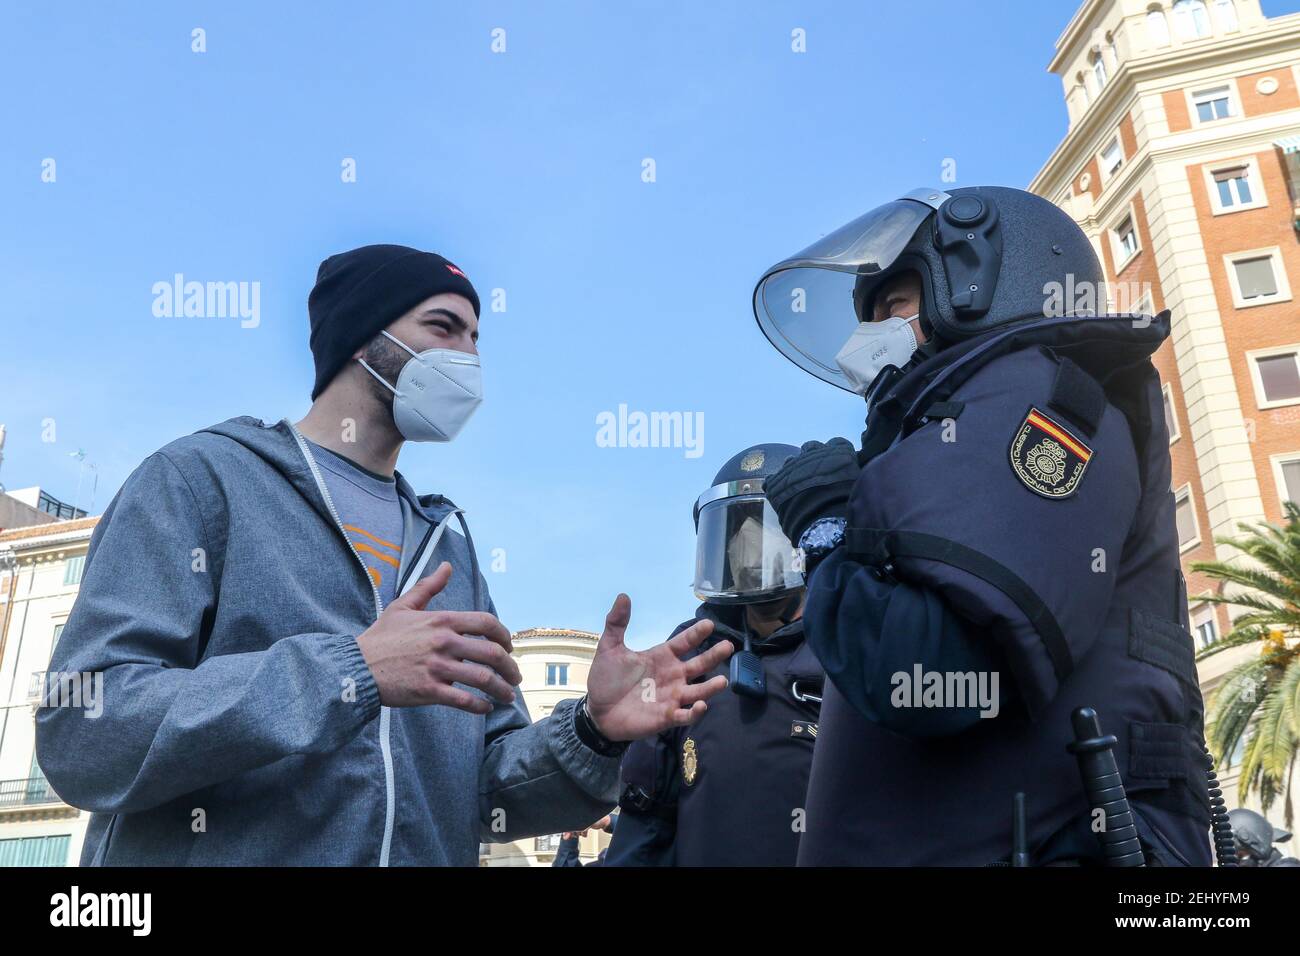 February 20, 2021: February 20, 2021 (Malaga) Around 300 people mobilize in support of Pablo Hasél in Malaga The protest, in which chants have been chanted against the Crown, has gone without incident. The protest was surrounded by a heavy police deployment. Credit: Lorenzo Carnero/ZUMA Wire/Alamy Live News Stock Photo